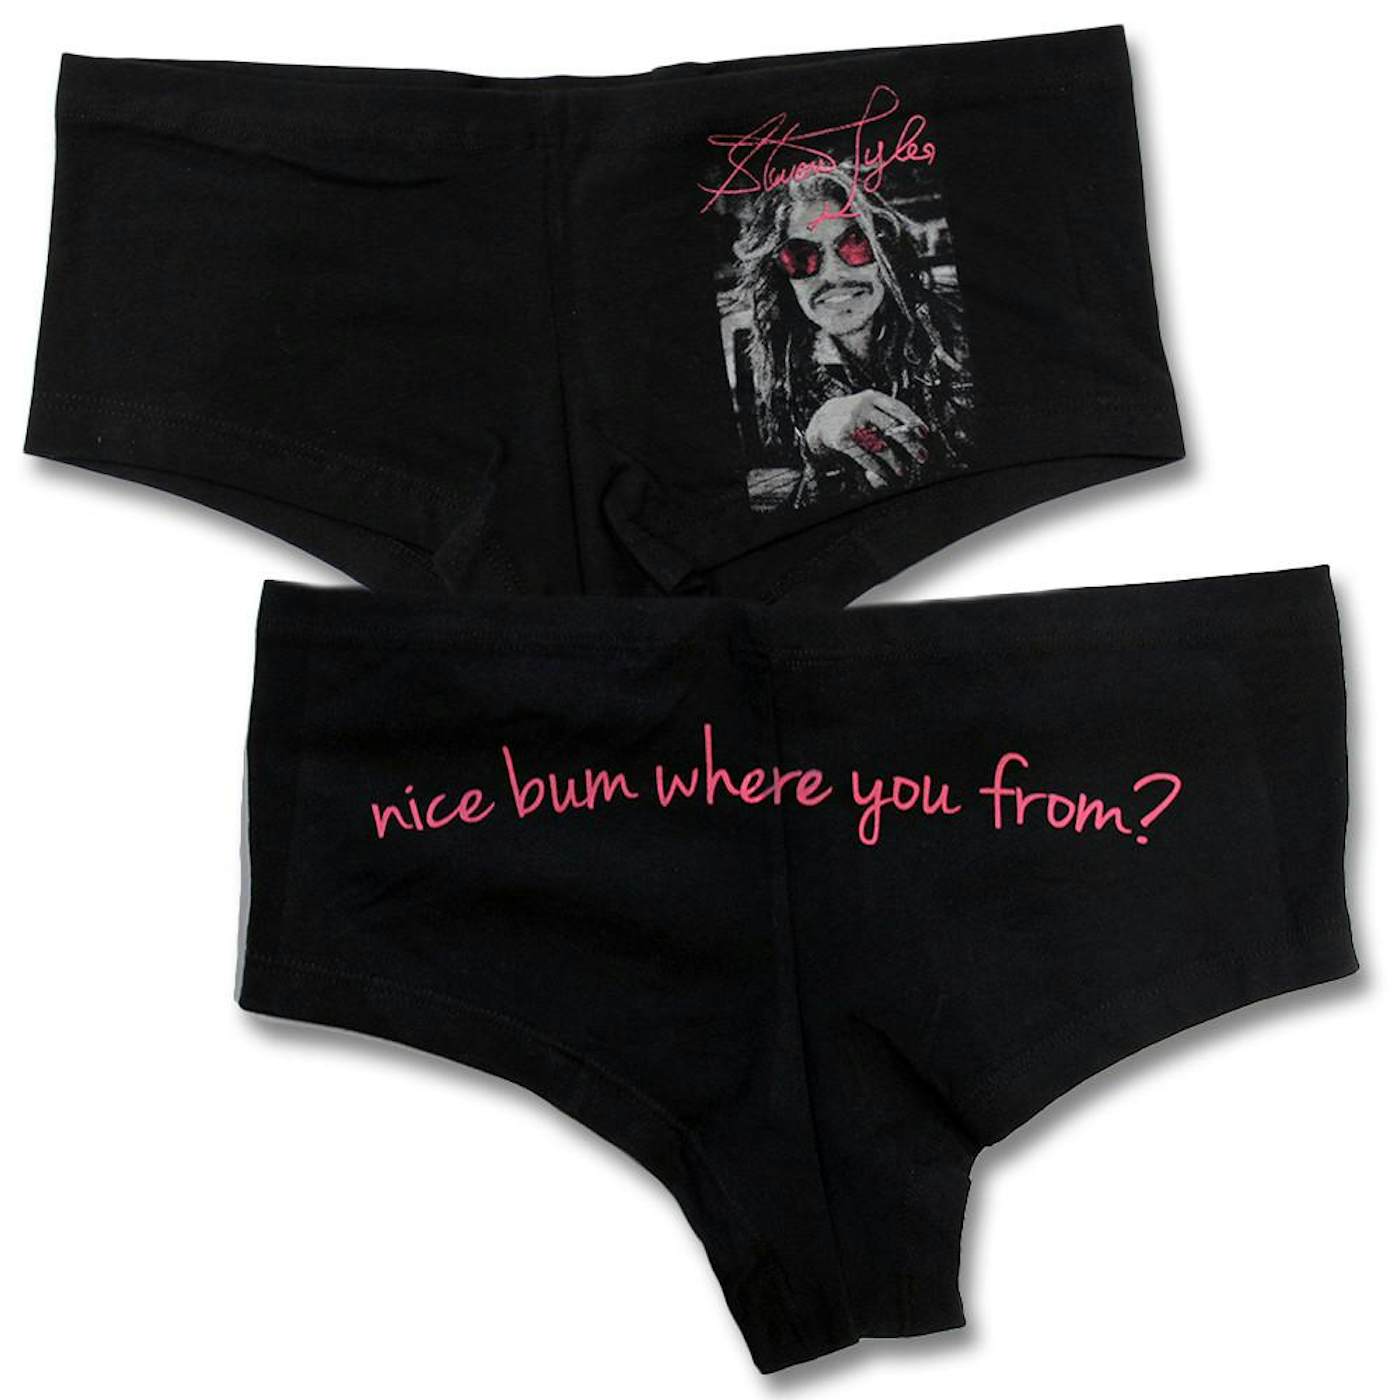 AEROSMITH Underwear Hipster, 2 in a Pack . Licensed , Small , Medium, or  Large Joe Perry, Steve Tyler Rock Band Merch -  Canada